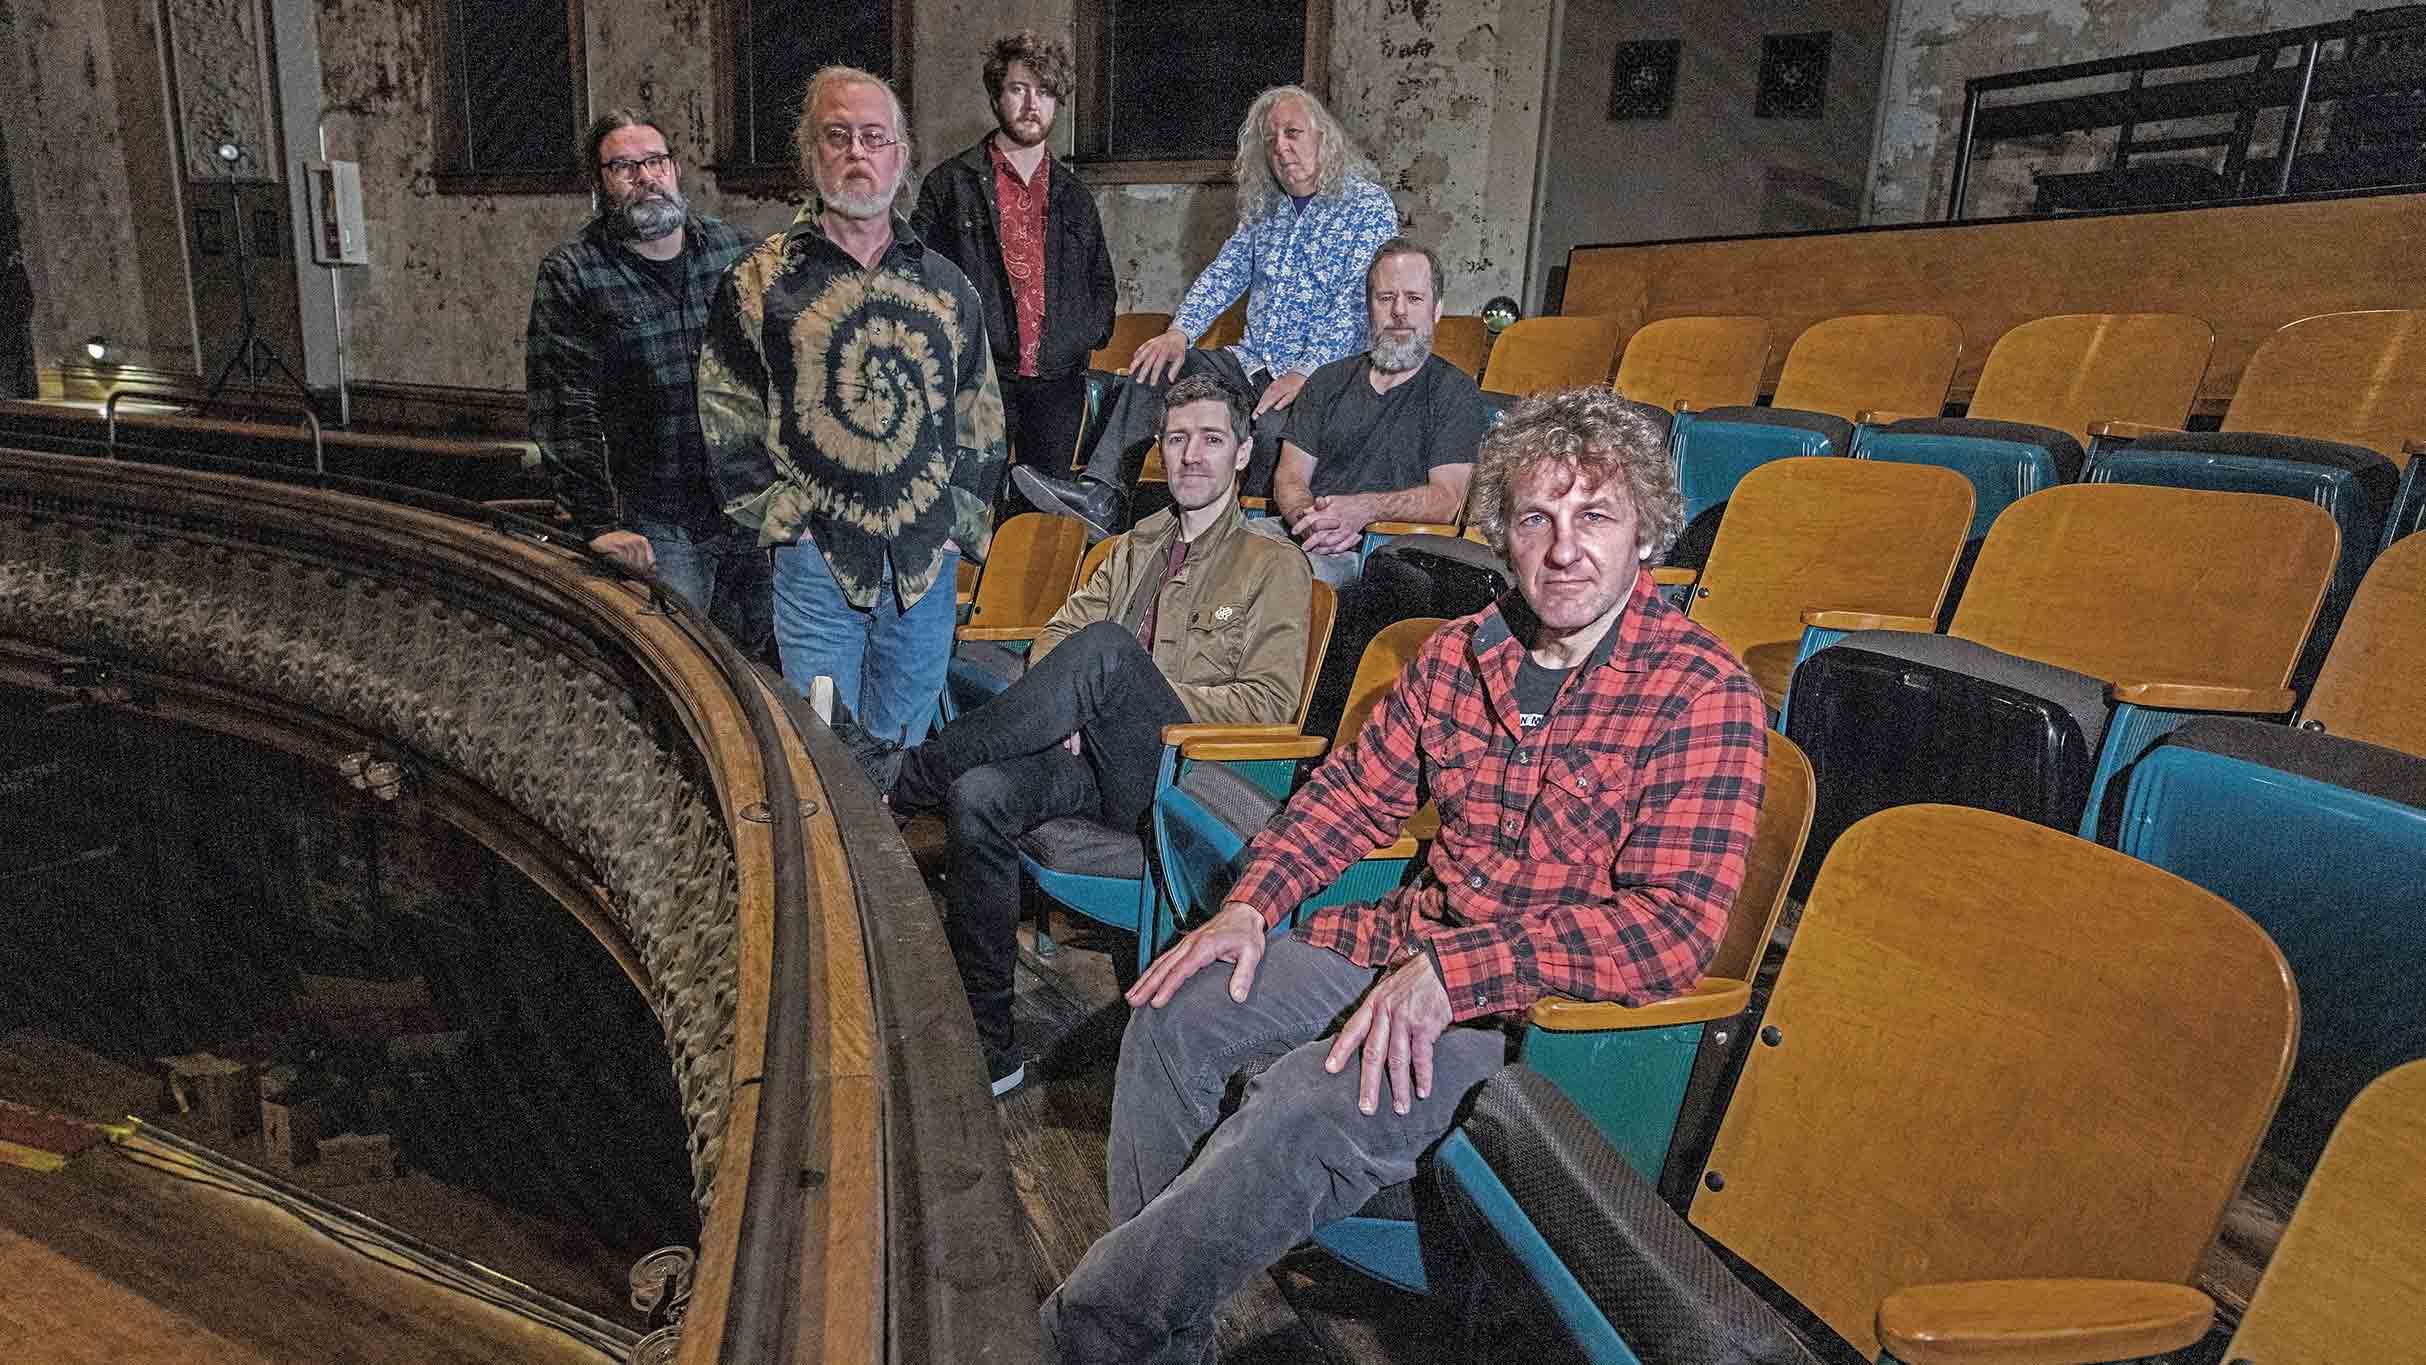 Yonder Mountain String Band, Railroad Earth, & Leftover Salmon in Asbury Park promo photo for Artist presale offer code